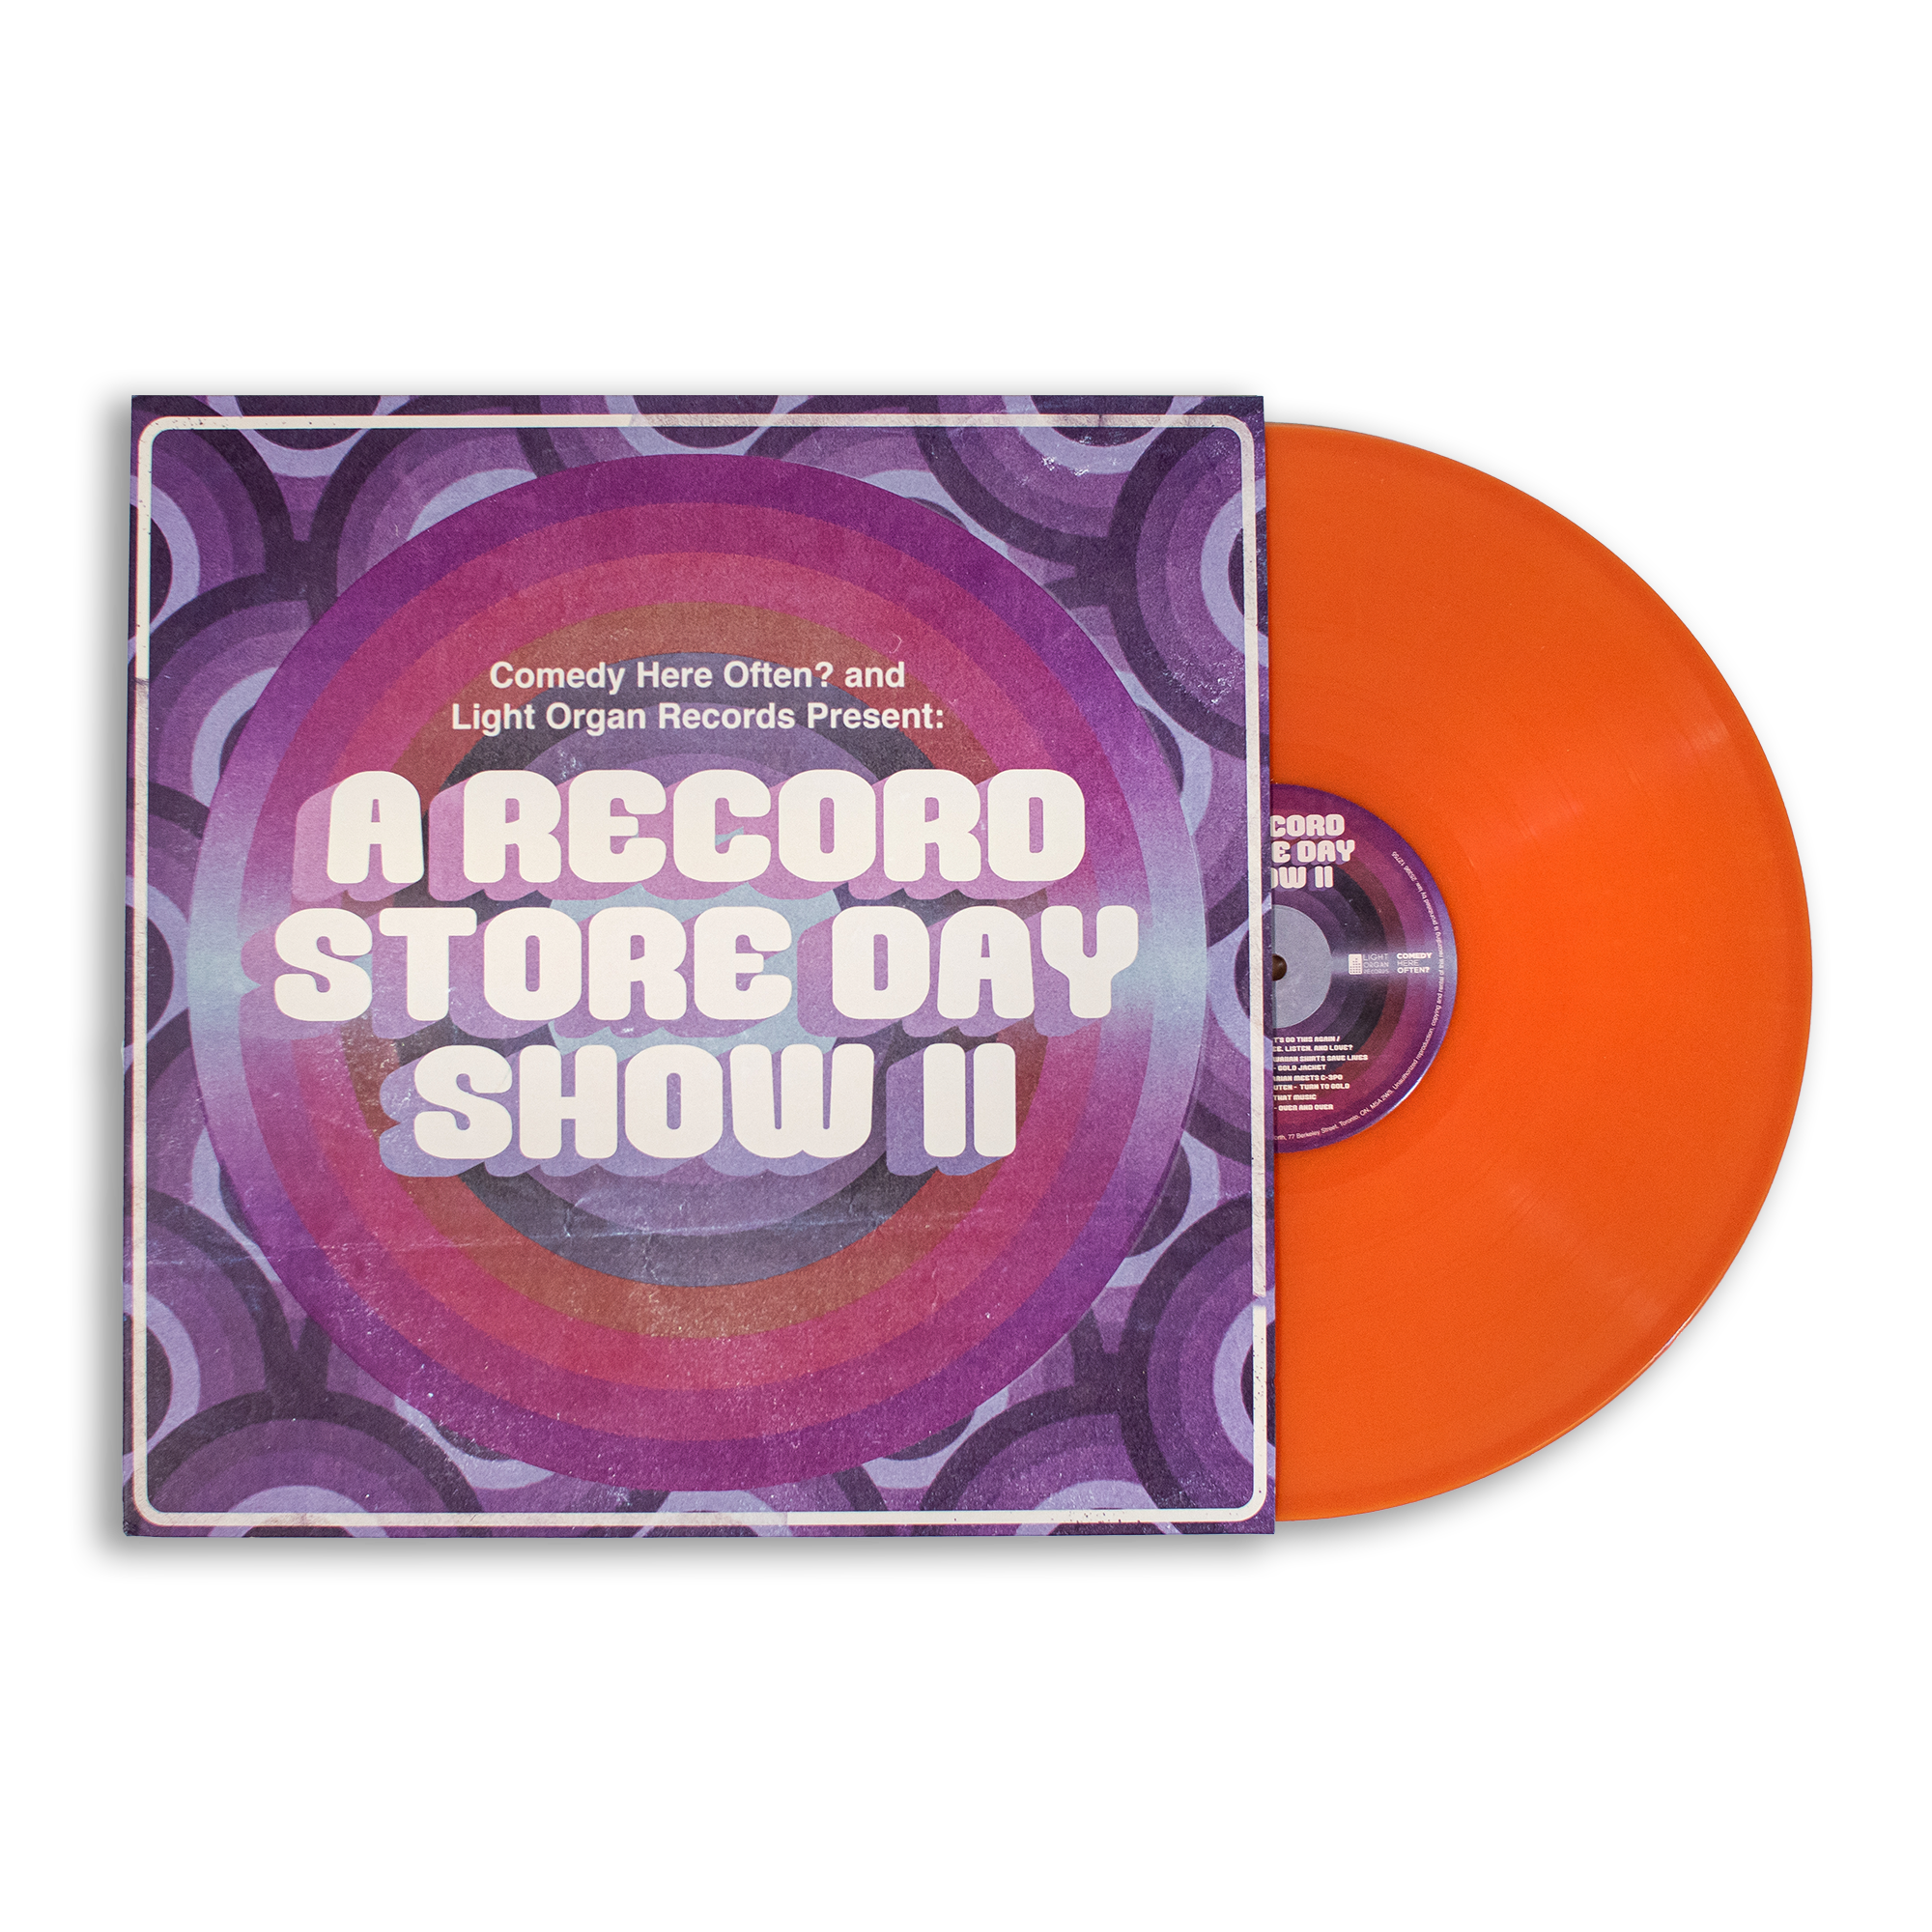 A Record Store Day Show II